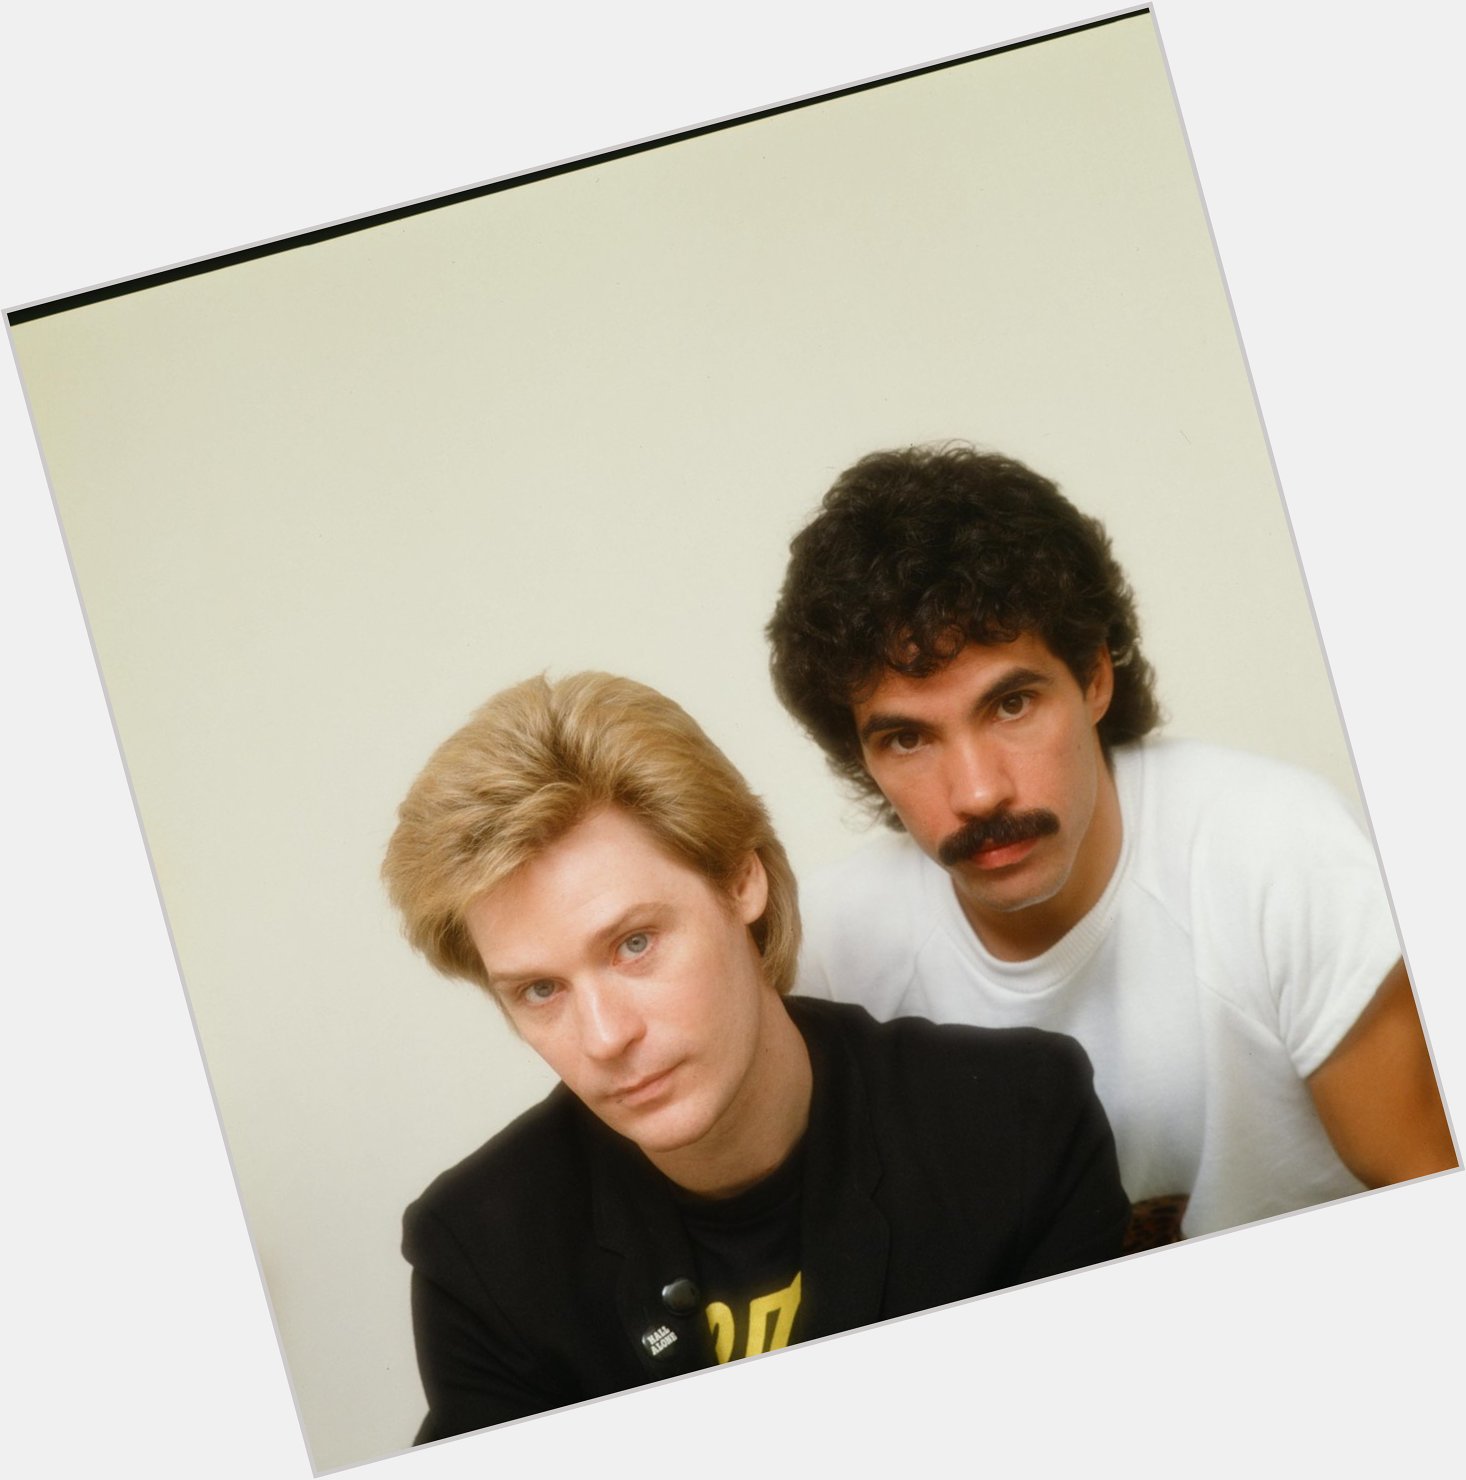 Hall & Oates making photo booths cool since 1980. Happy birthday to one half of the duo, John Oates! 